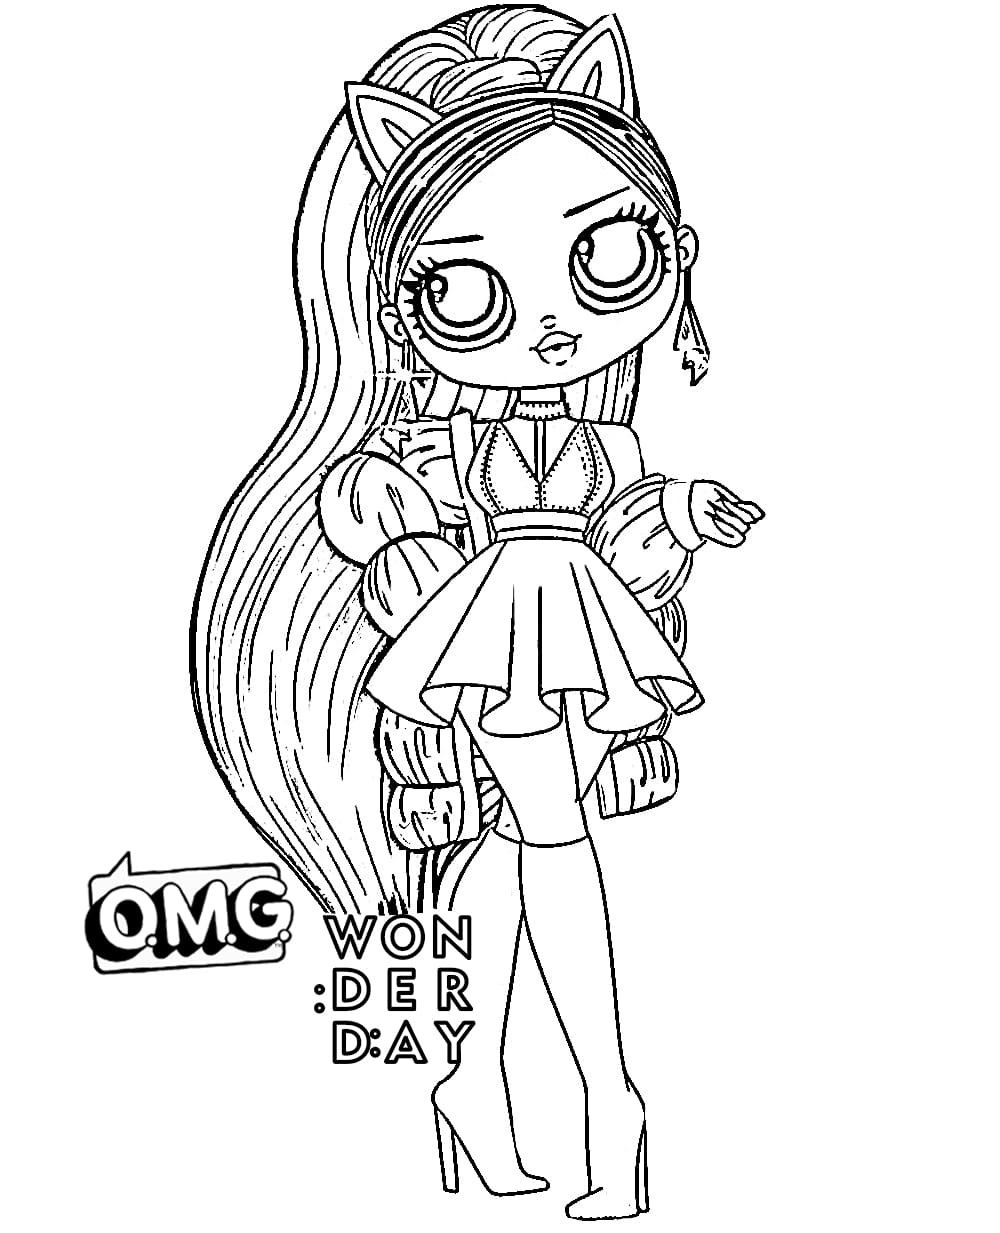 coloring : Colouring Lol Dolls Lovely Coloring Pages Lol Omg Download Or  Print New Dolls For Free Colouring Lol Dolls ~ queens